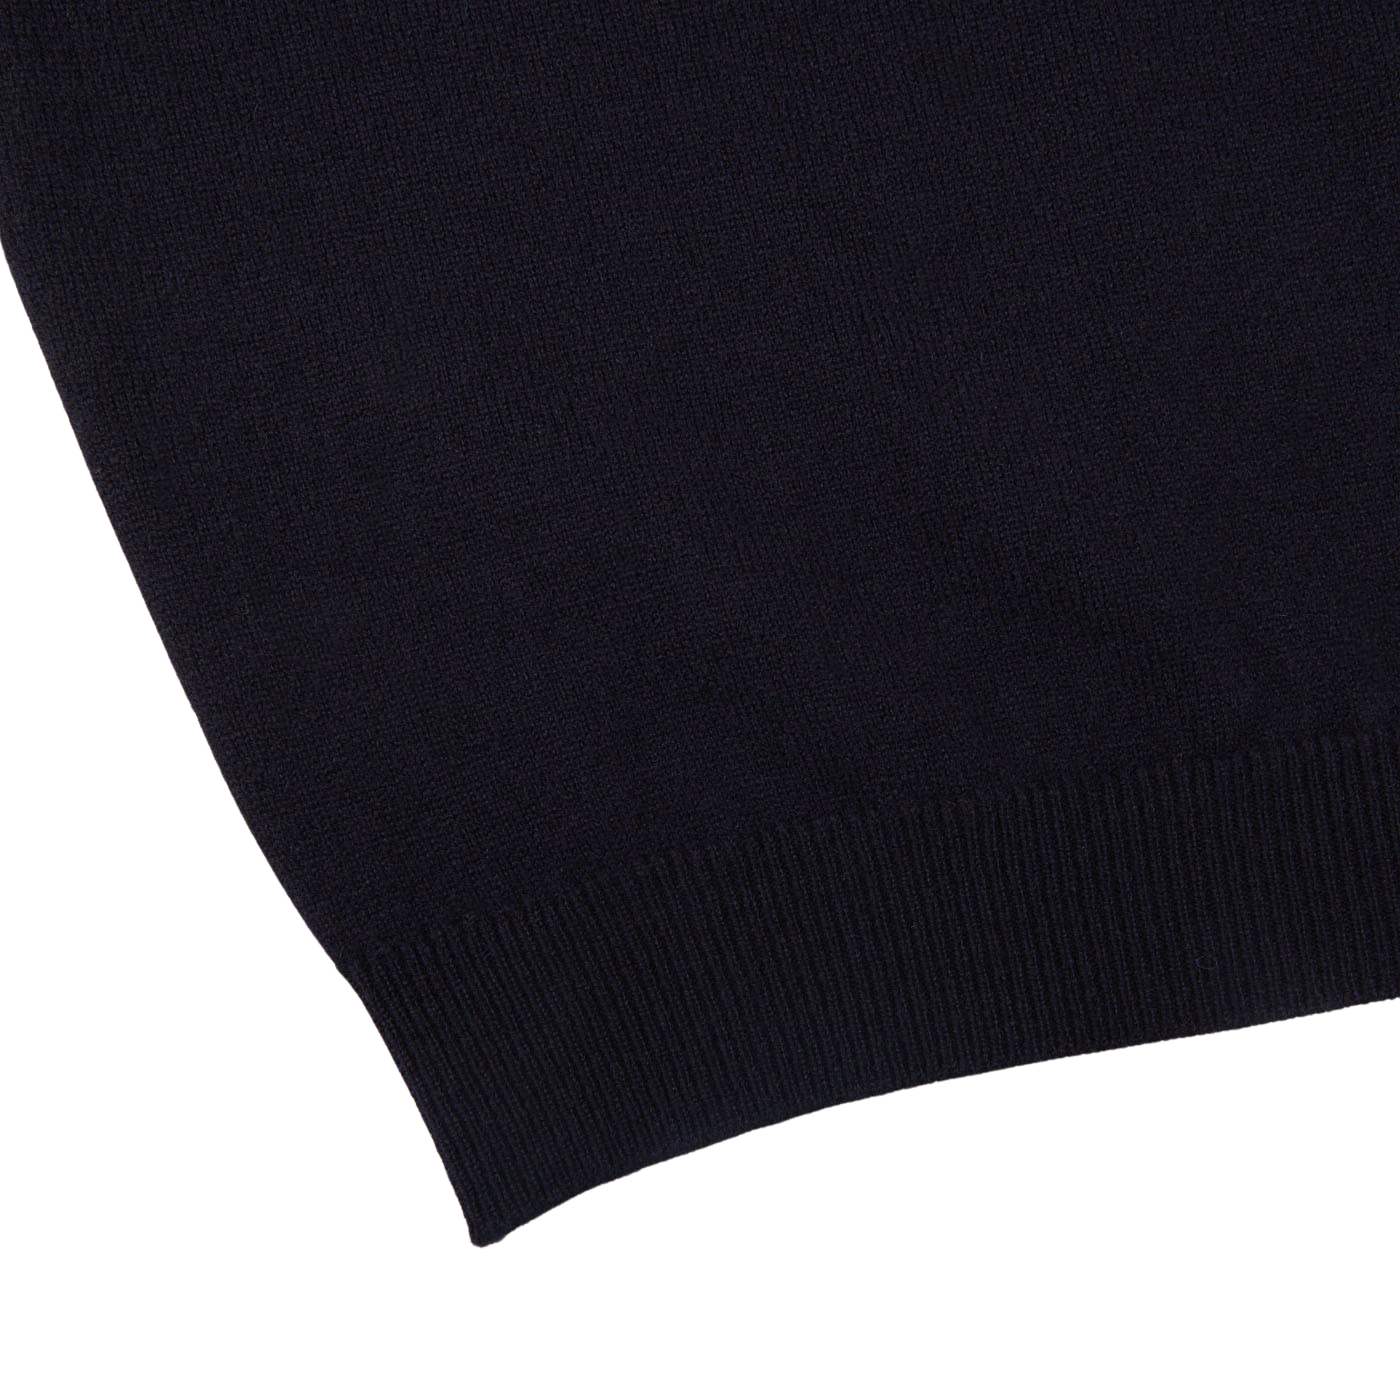 A comfy close up of a William Lockie Dark Navy V-Neck Lambswool Sweater.